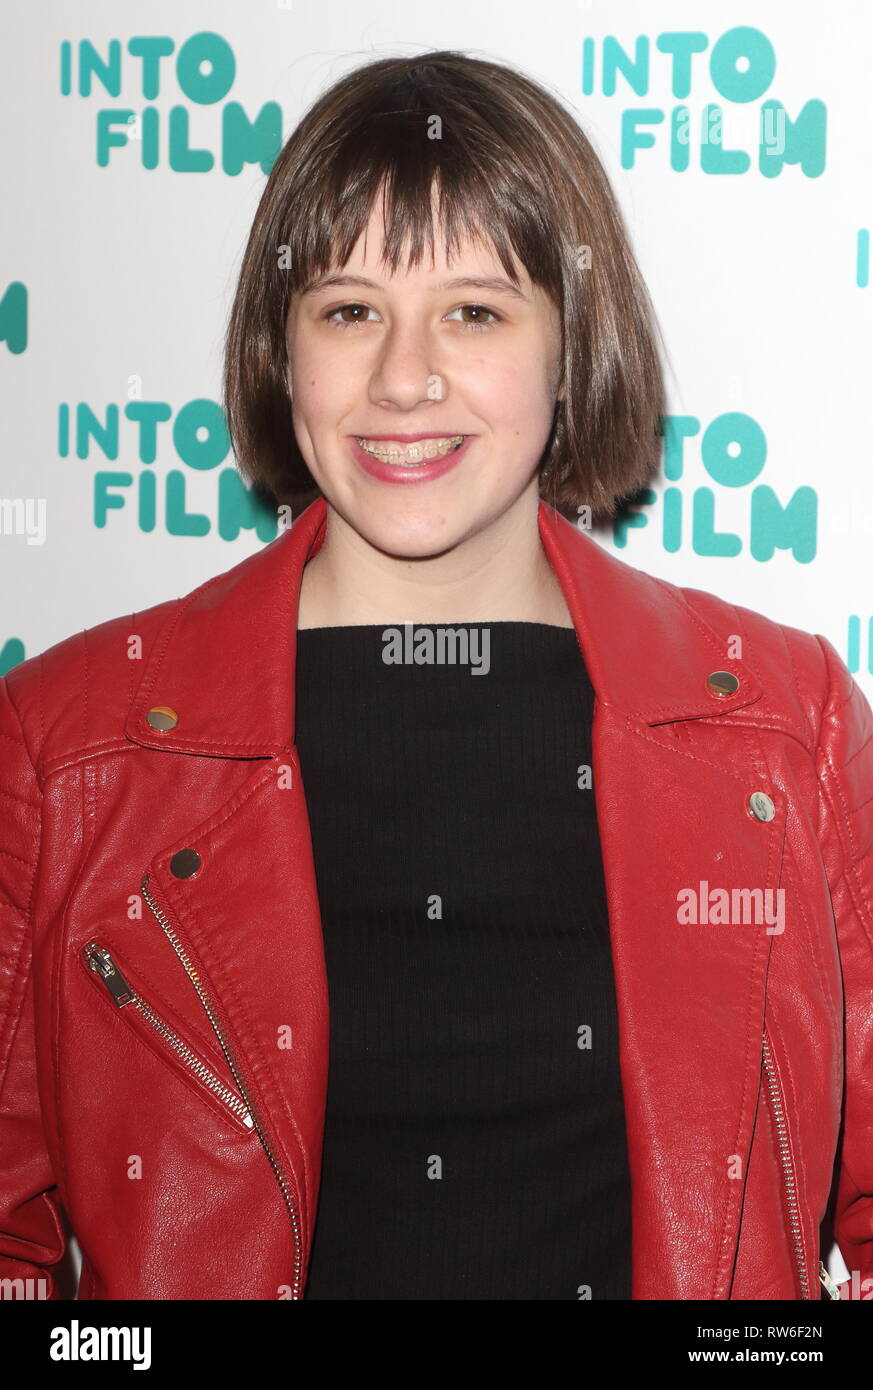 Ruby Barnhill seen during the Into Film Awards 2019 at the Odeon Luxe cinema, Leicester Square in London. Stock Photo